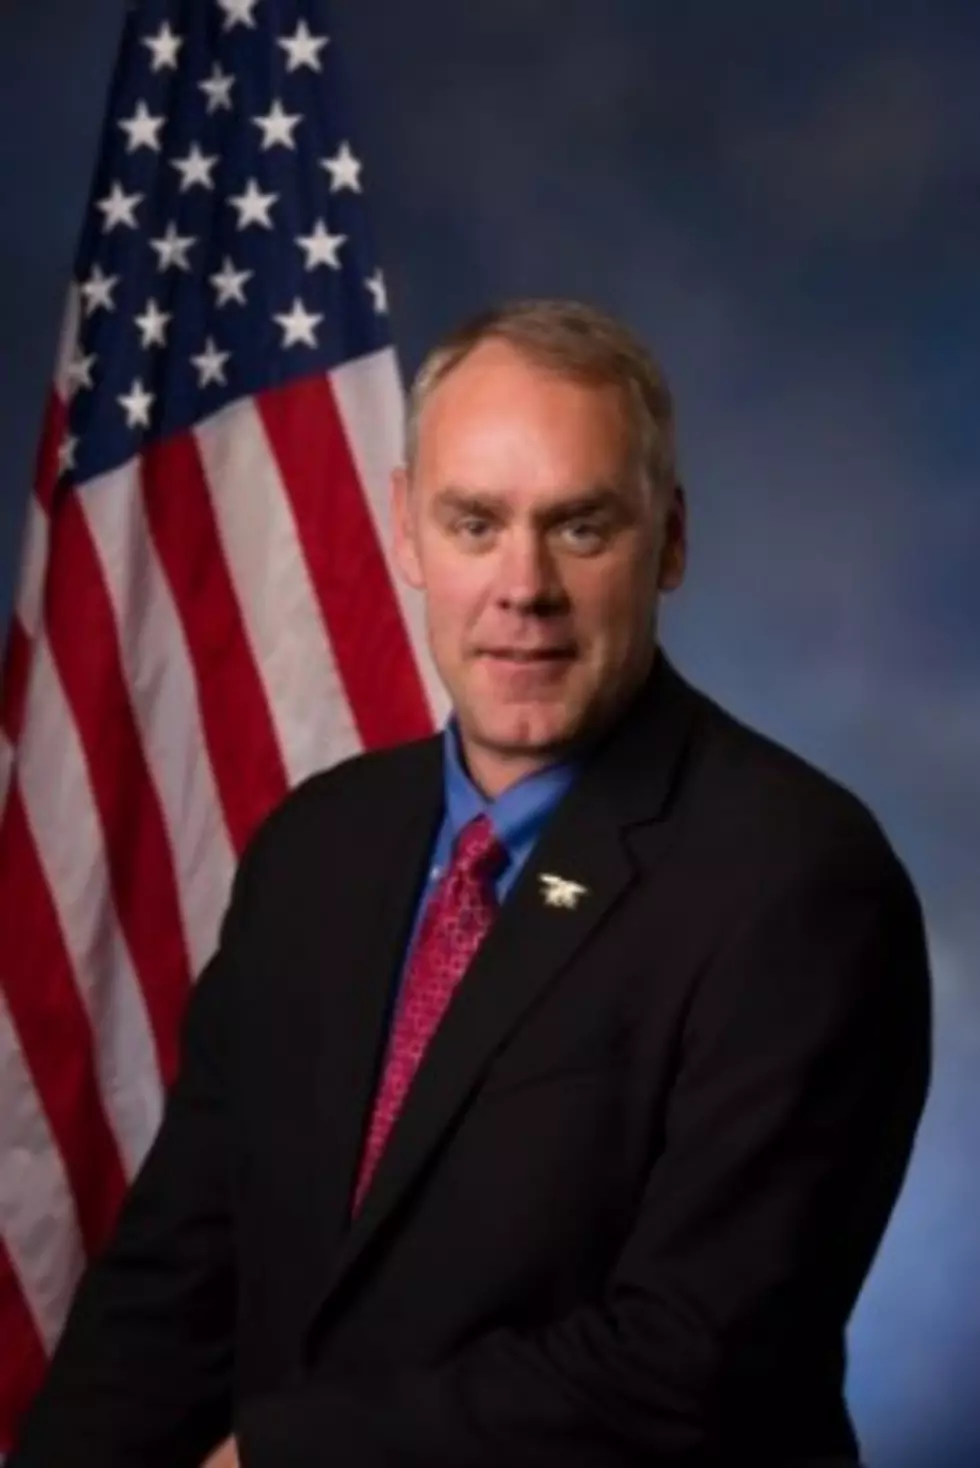 Zinke Launches Reelection Campaign